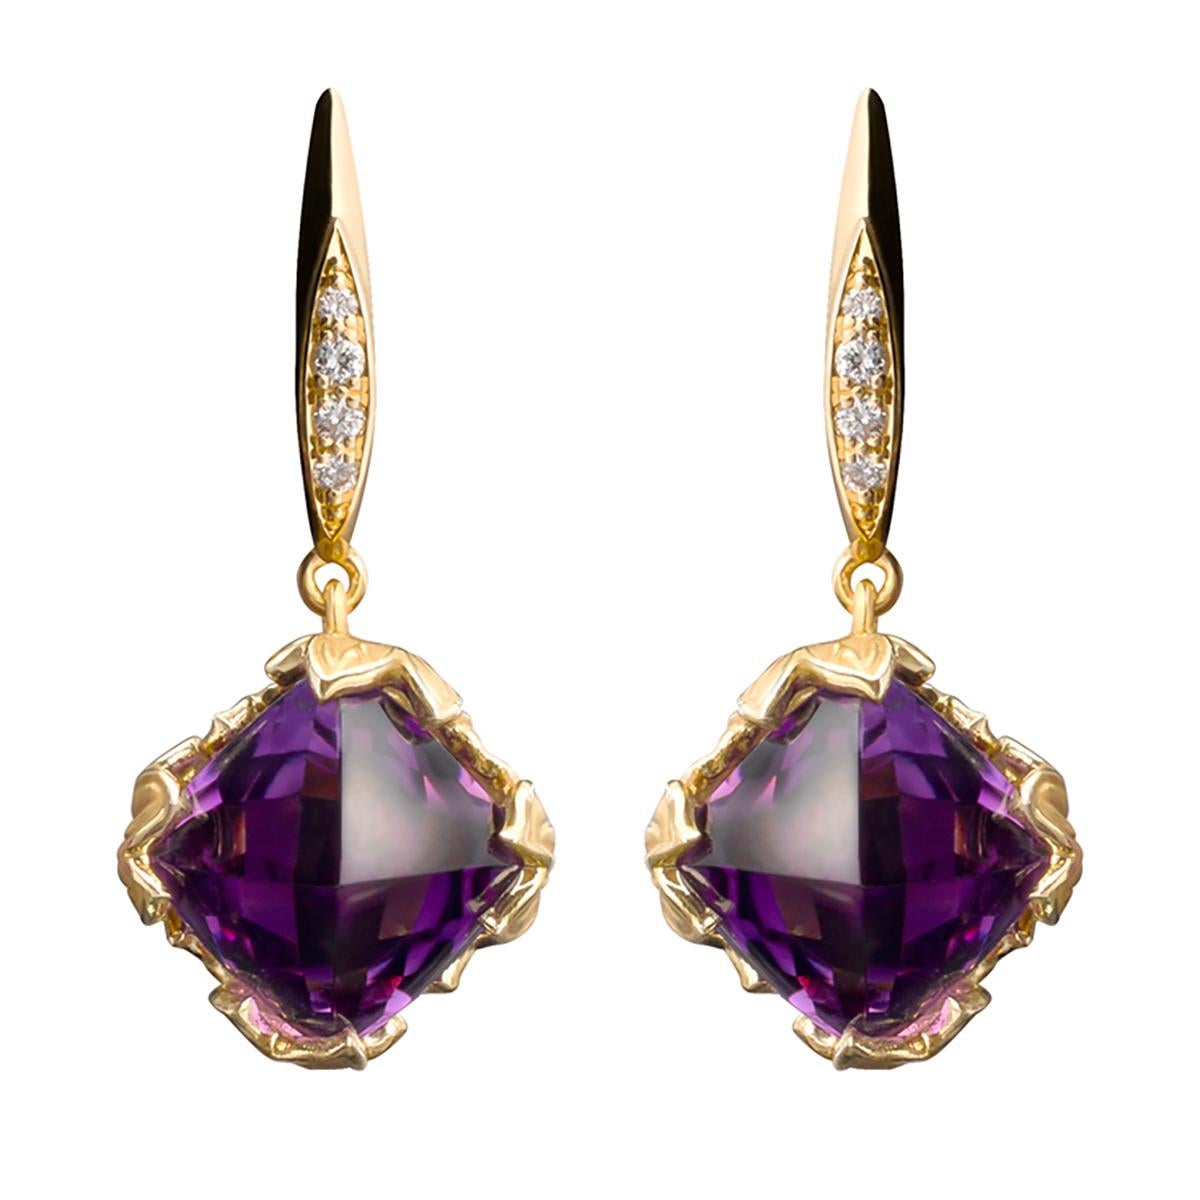 Signed by Carrera y Carrera, this elegant drop lia earrings with 5.53 carats total sugarloaf amethyst and 0.06 round diamond is made in 18k Yellow Gold. Perfect for a gift or wear in any special occasion. 

